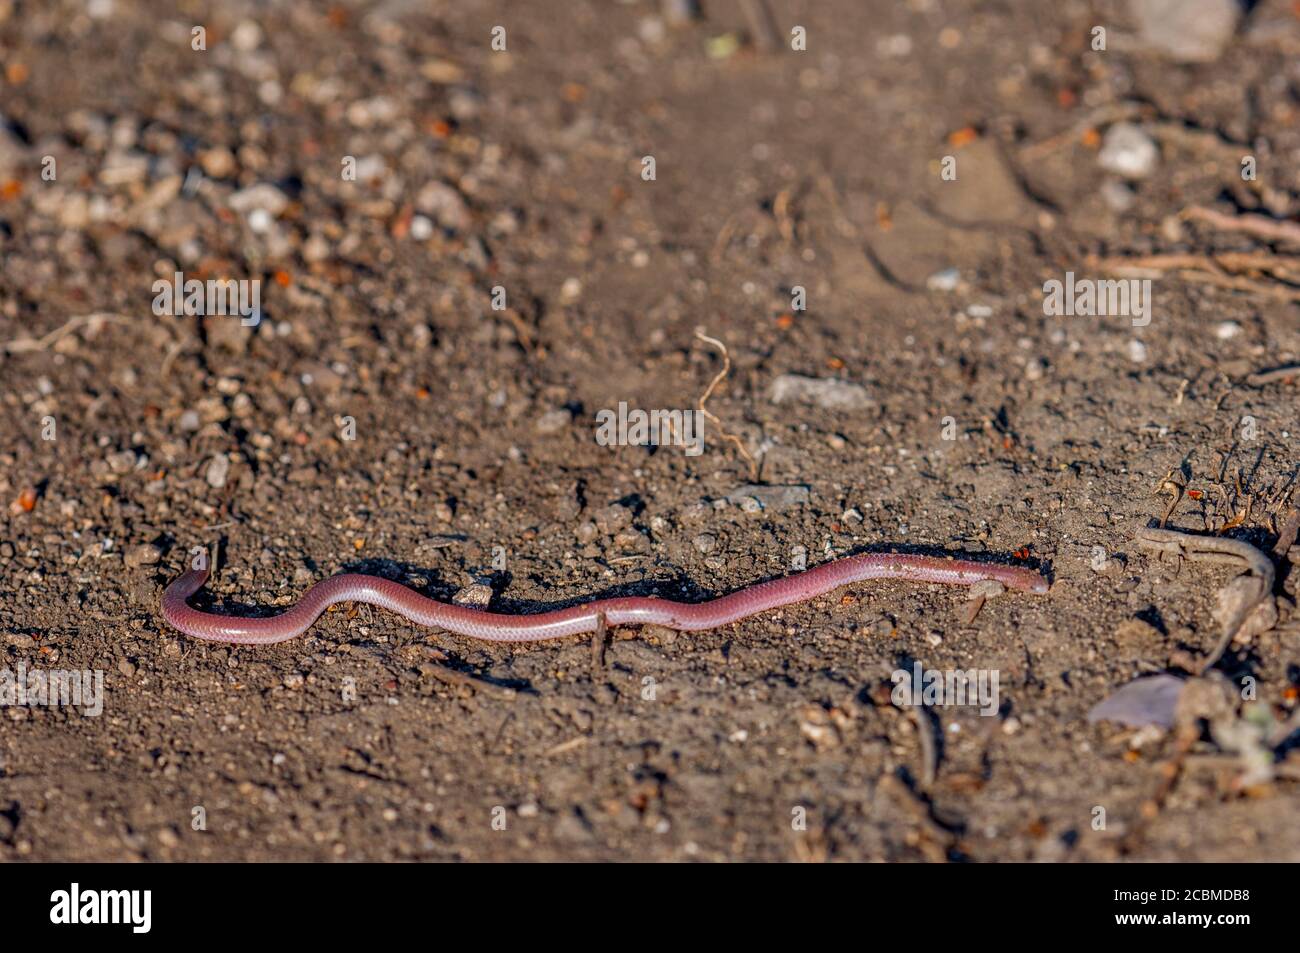 A Texas blind snake, Leptotyphlops dulcis, (also called plains thread snake) in the Hill Country of Texas near Hunt, USA. Stock Photo